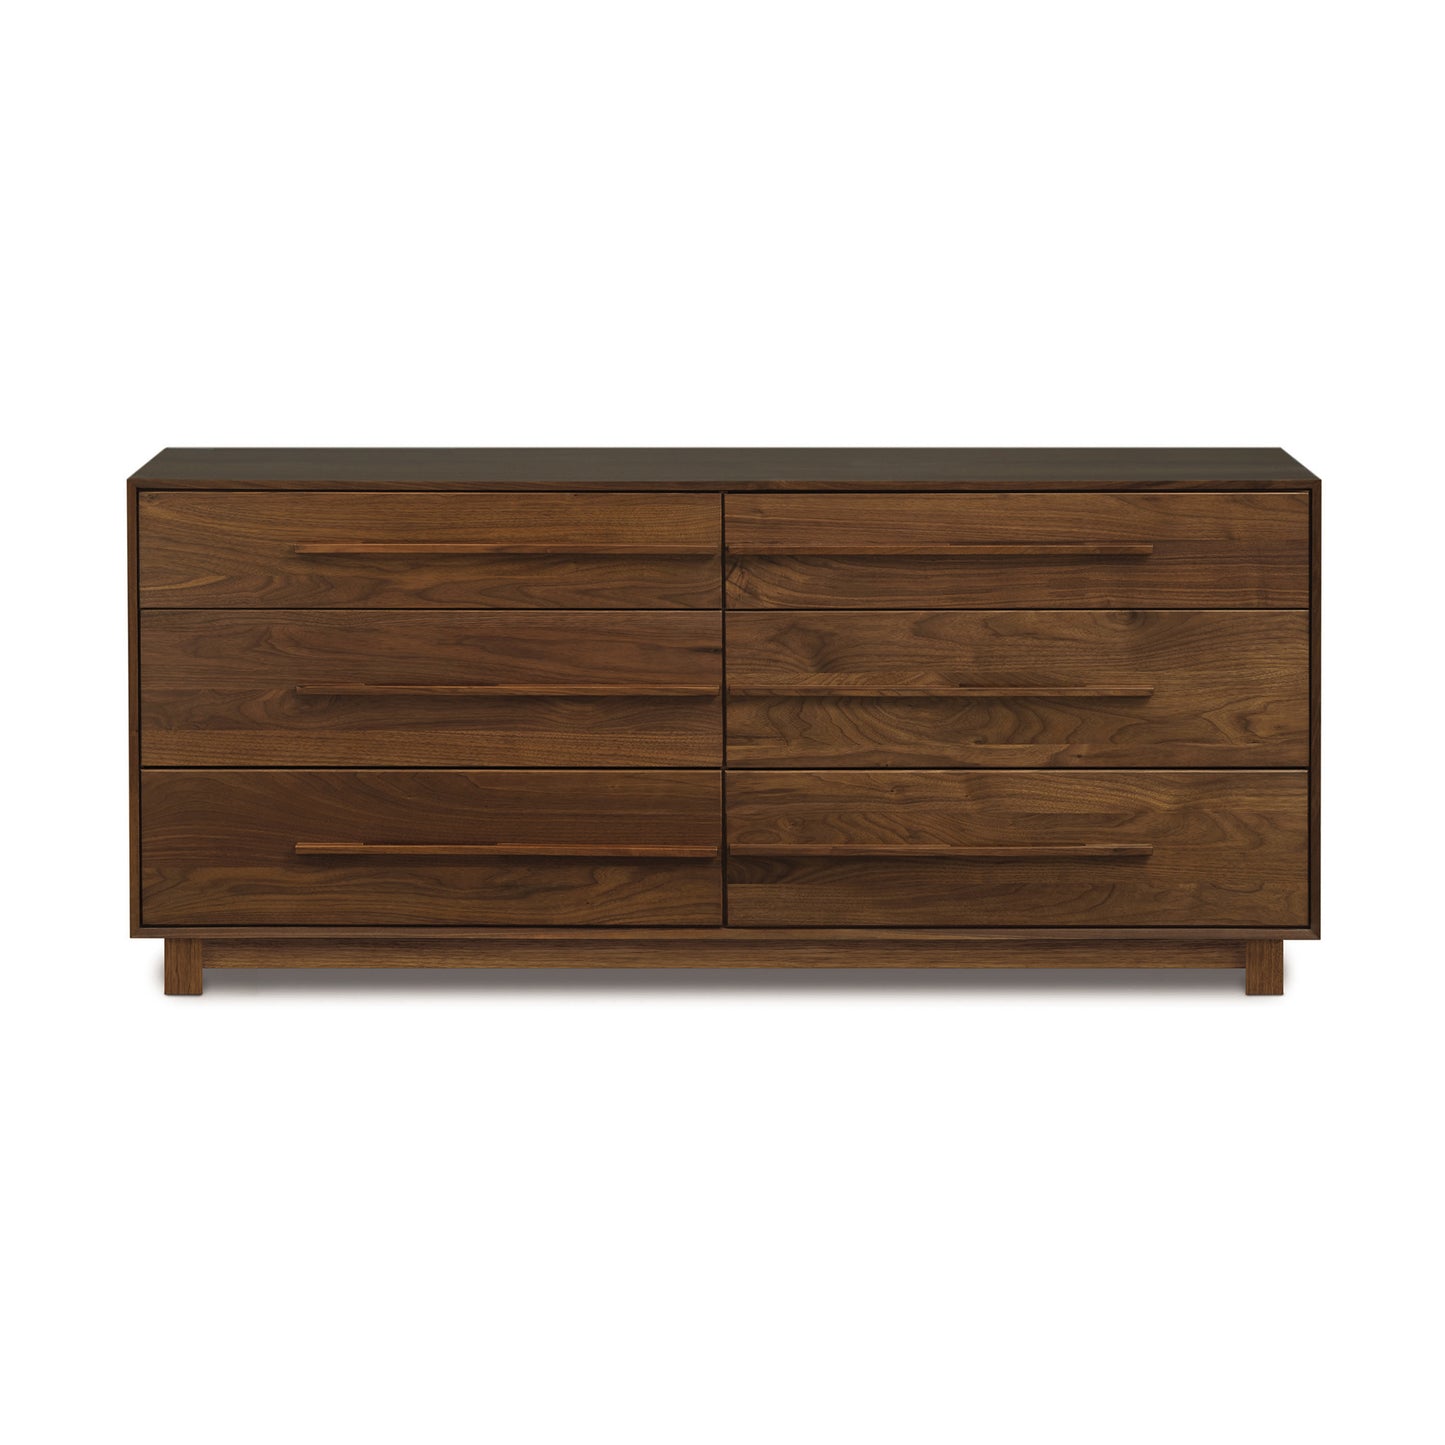 The Sloane 6-Drawer Dresser, a modern walnut dresser with four drawers, is the perfect addition to any modern bedroom. It is manufactured by Copeland Furniture.